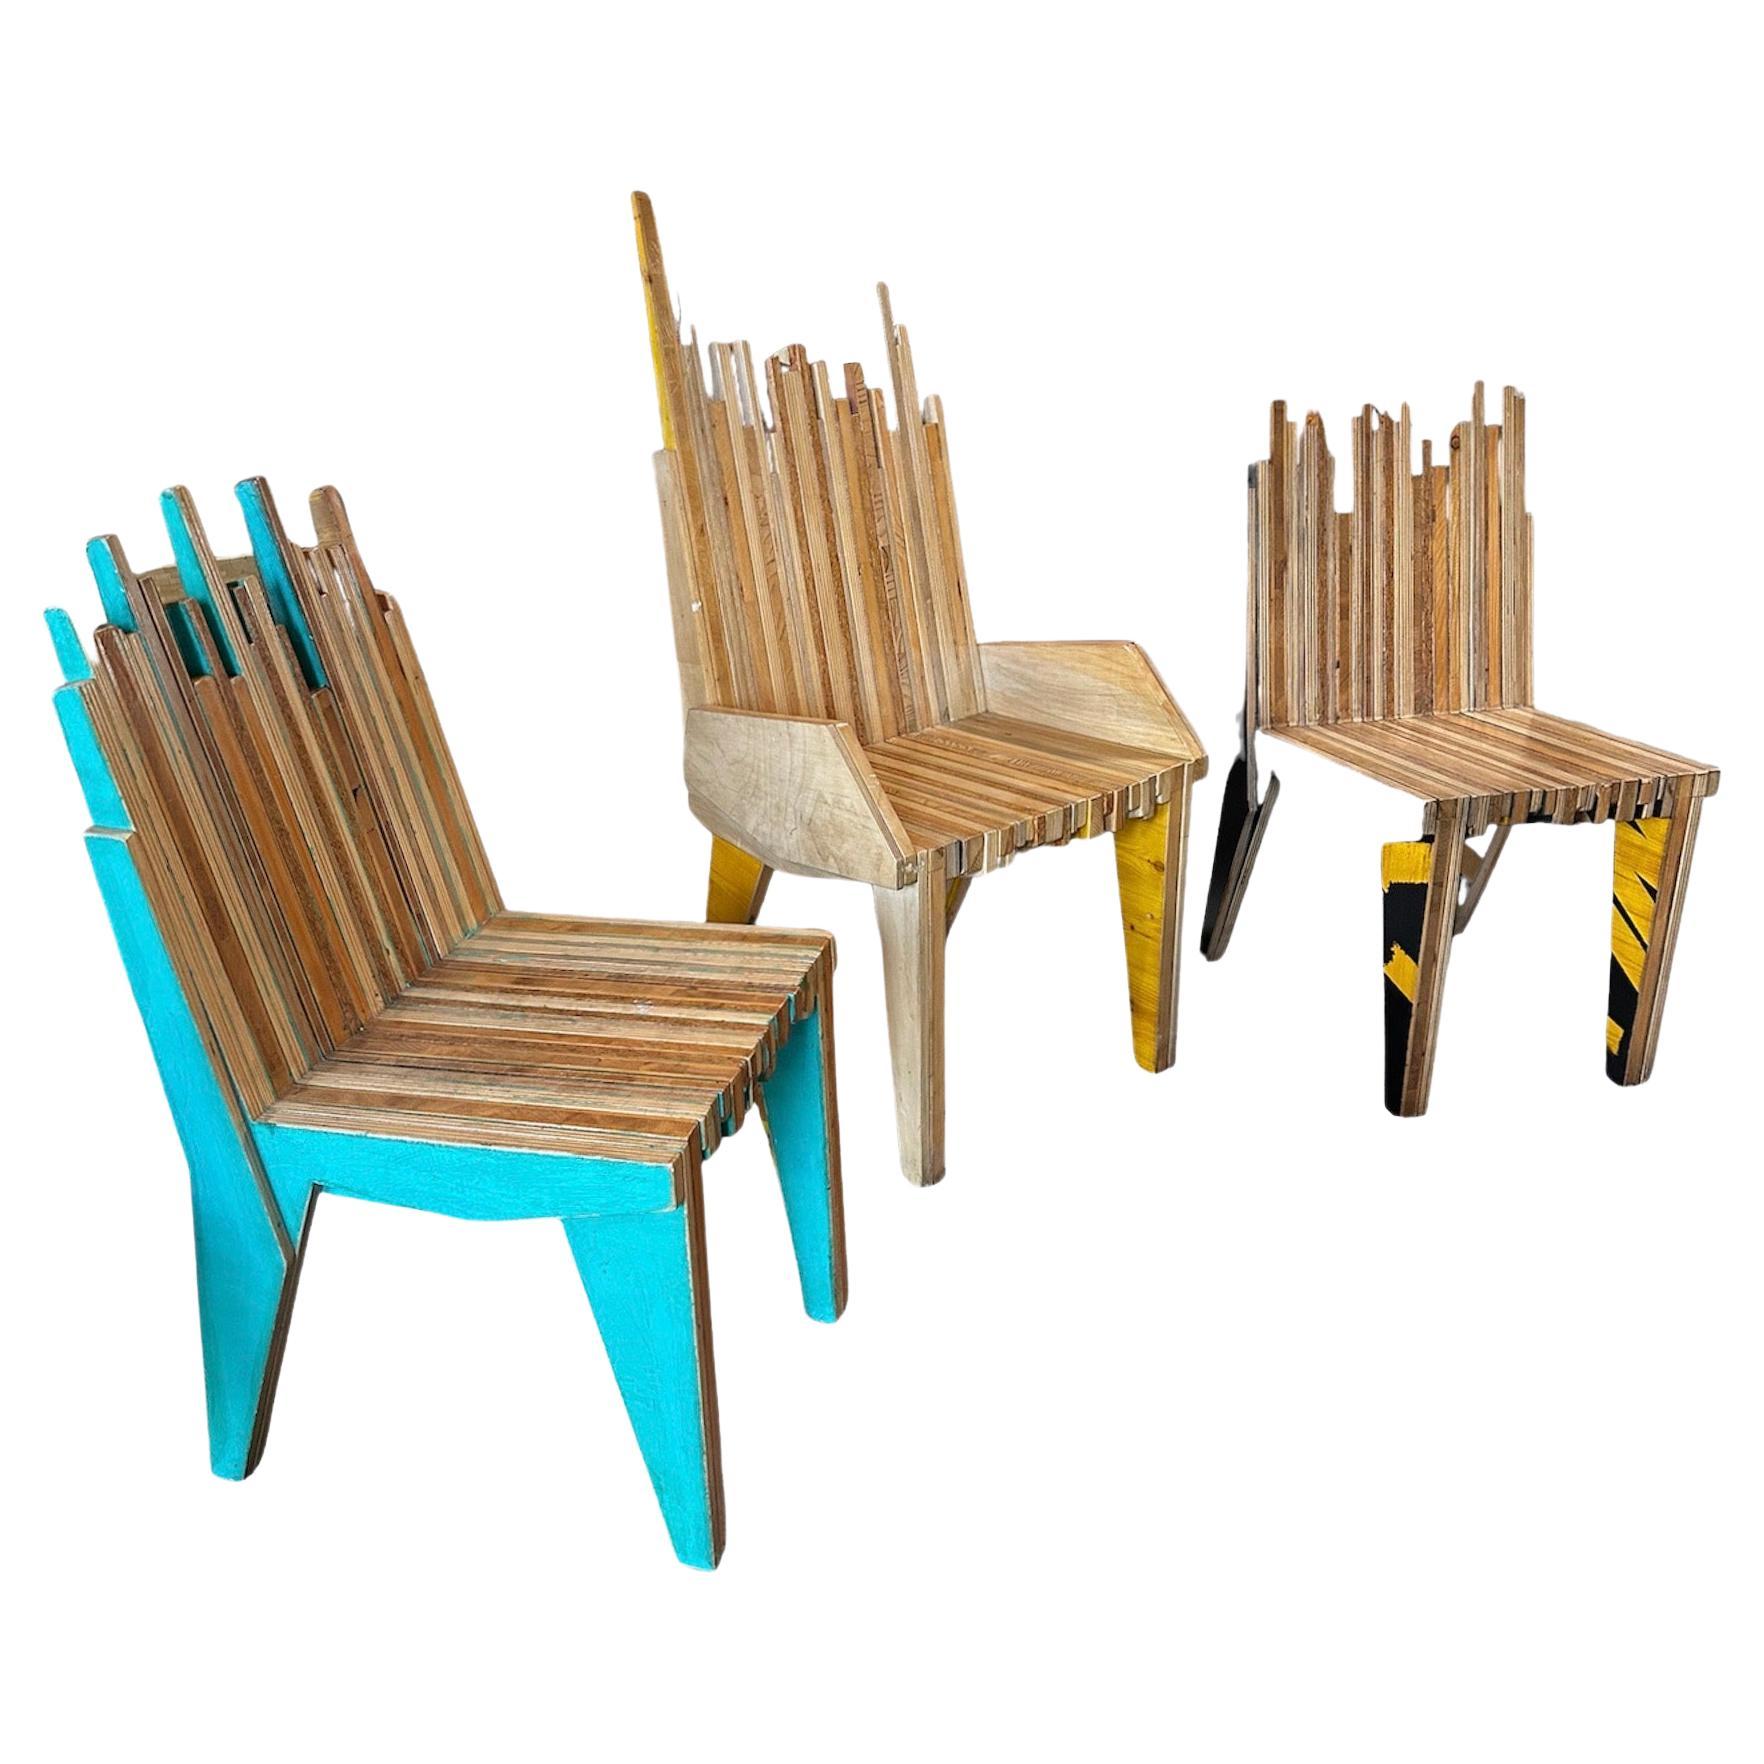 Set of 3 Rare Wood Chairs  By Robino &  Denton For Petroglyph 2011